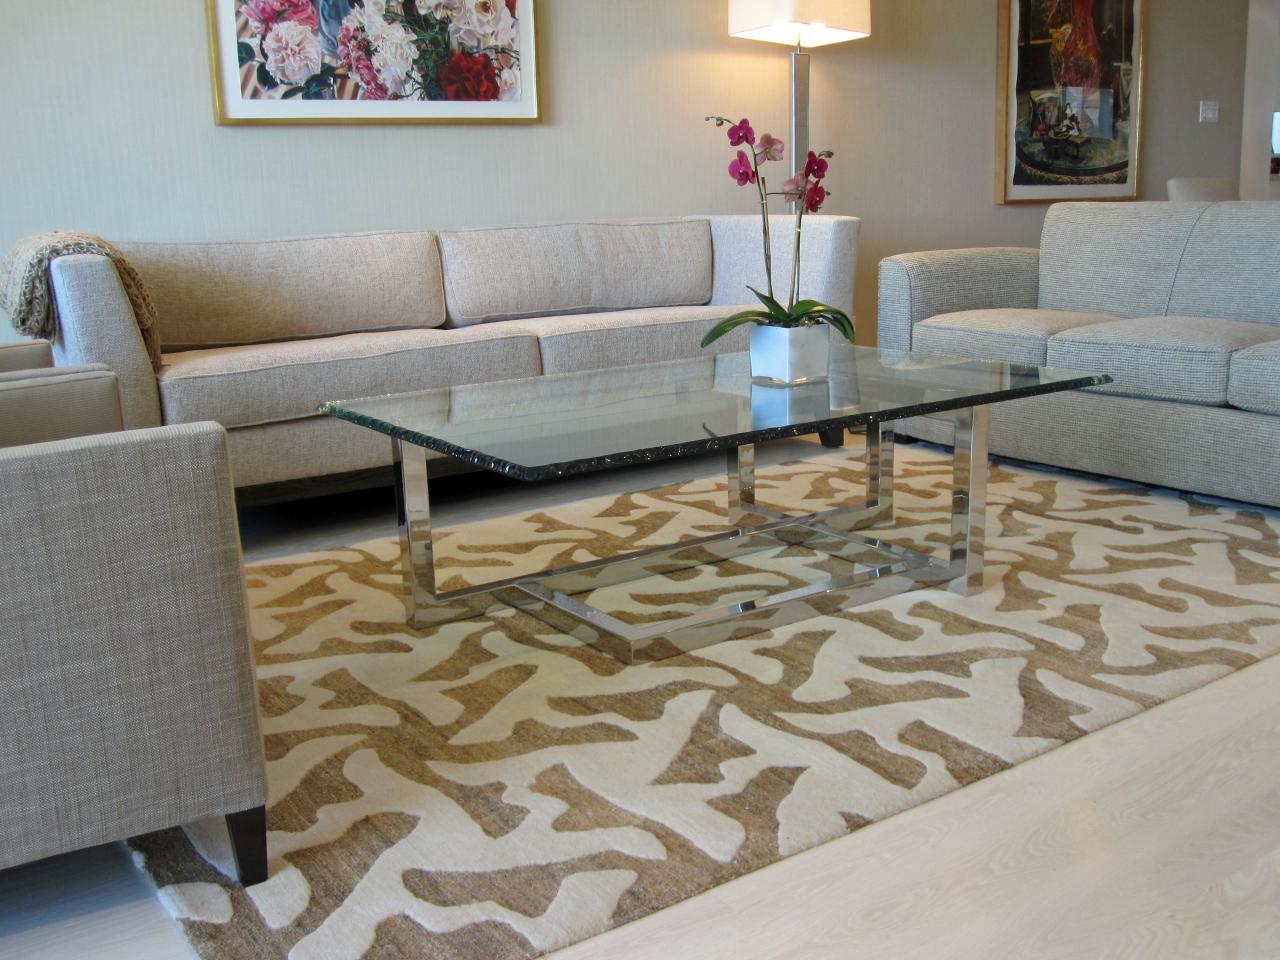 Choosing The Best Area Rug For Your, How To Choose Area Rug Size For Living Room